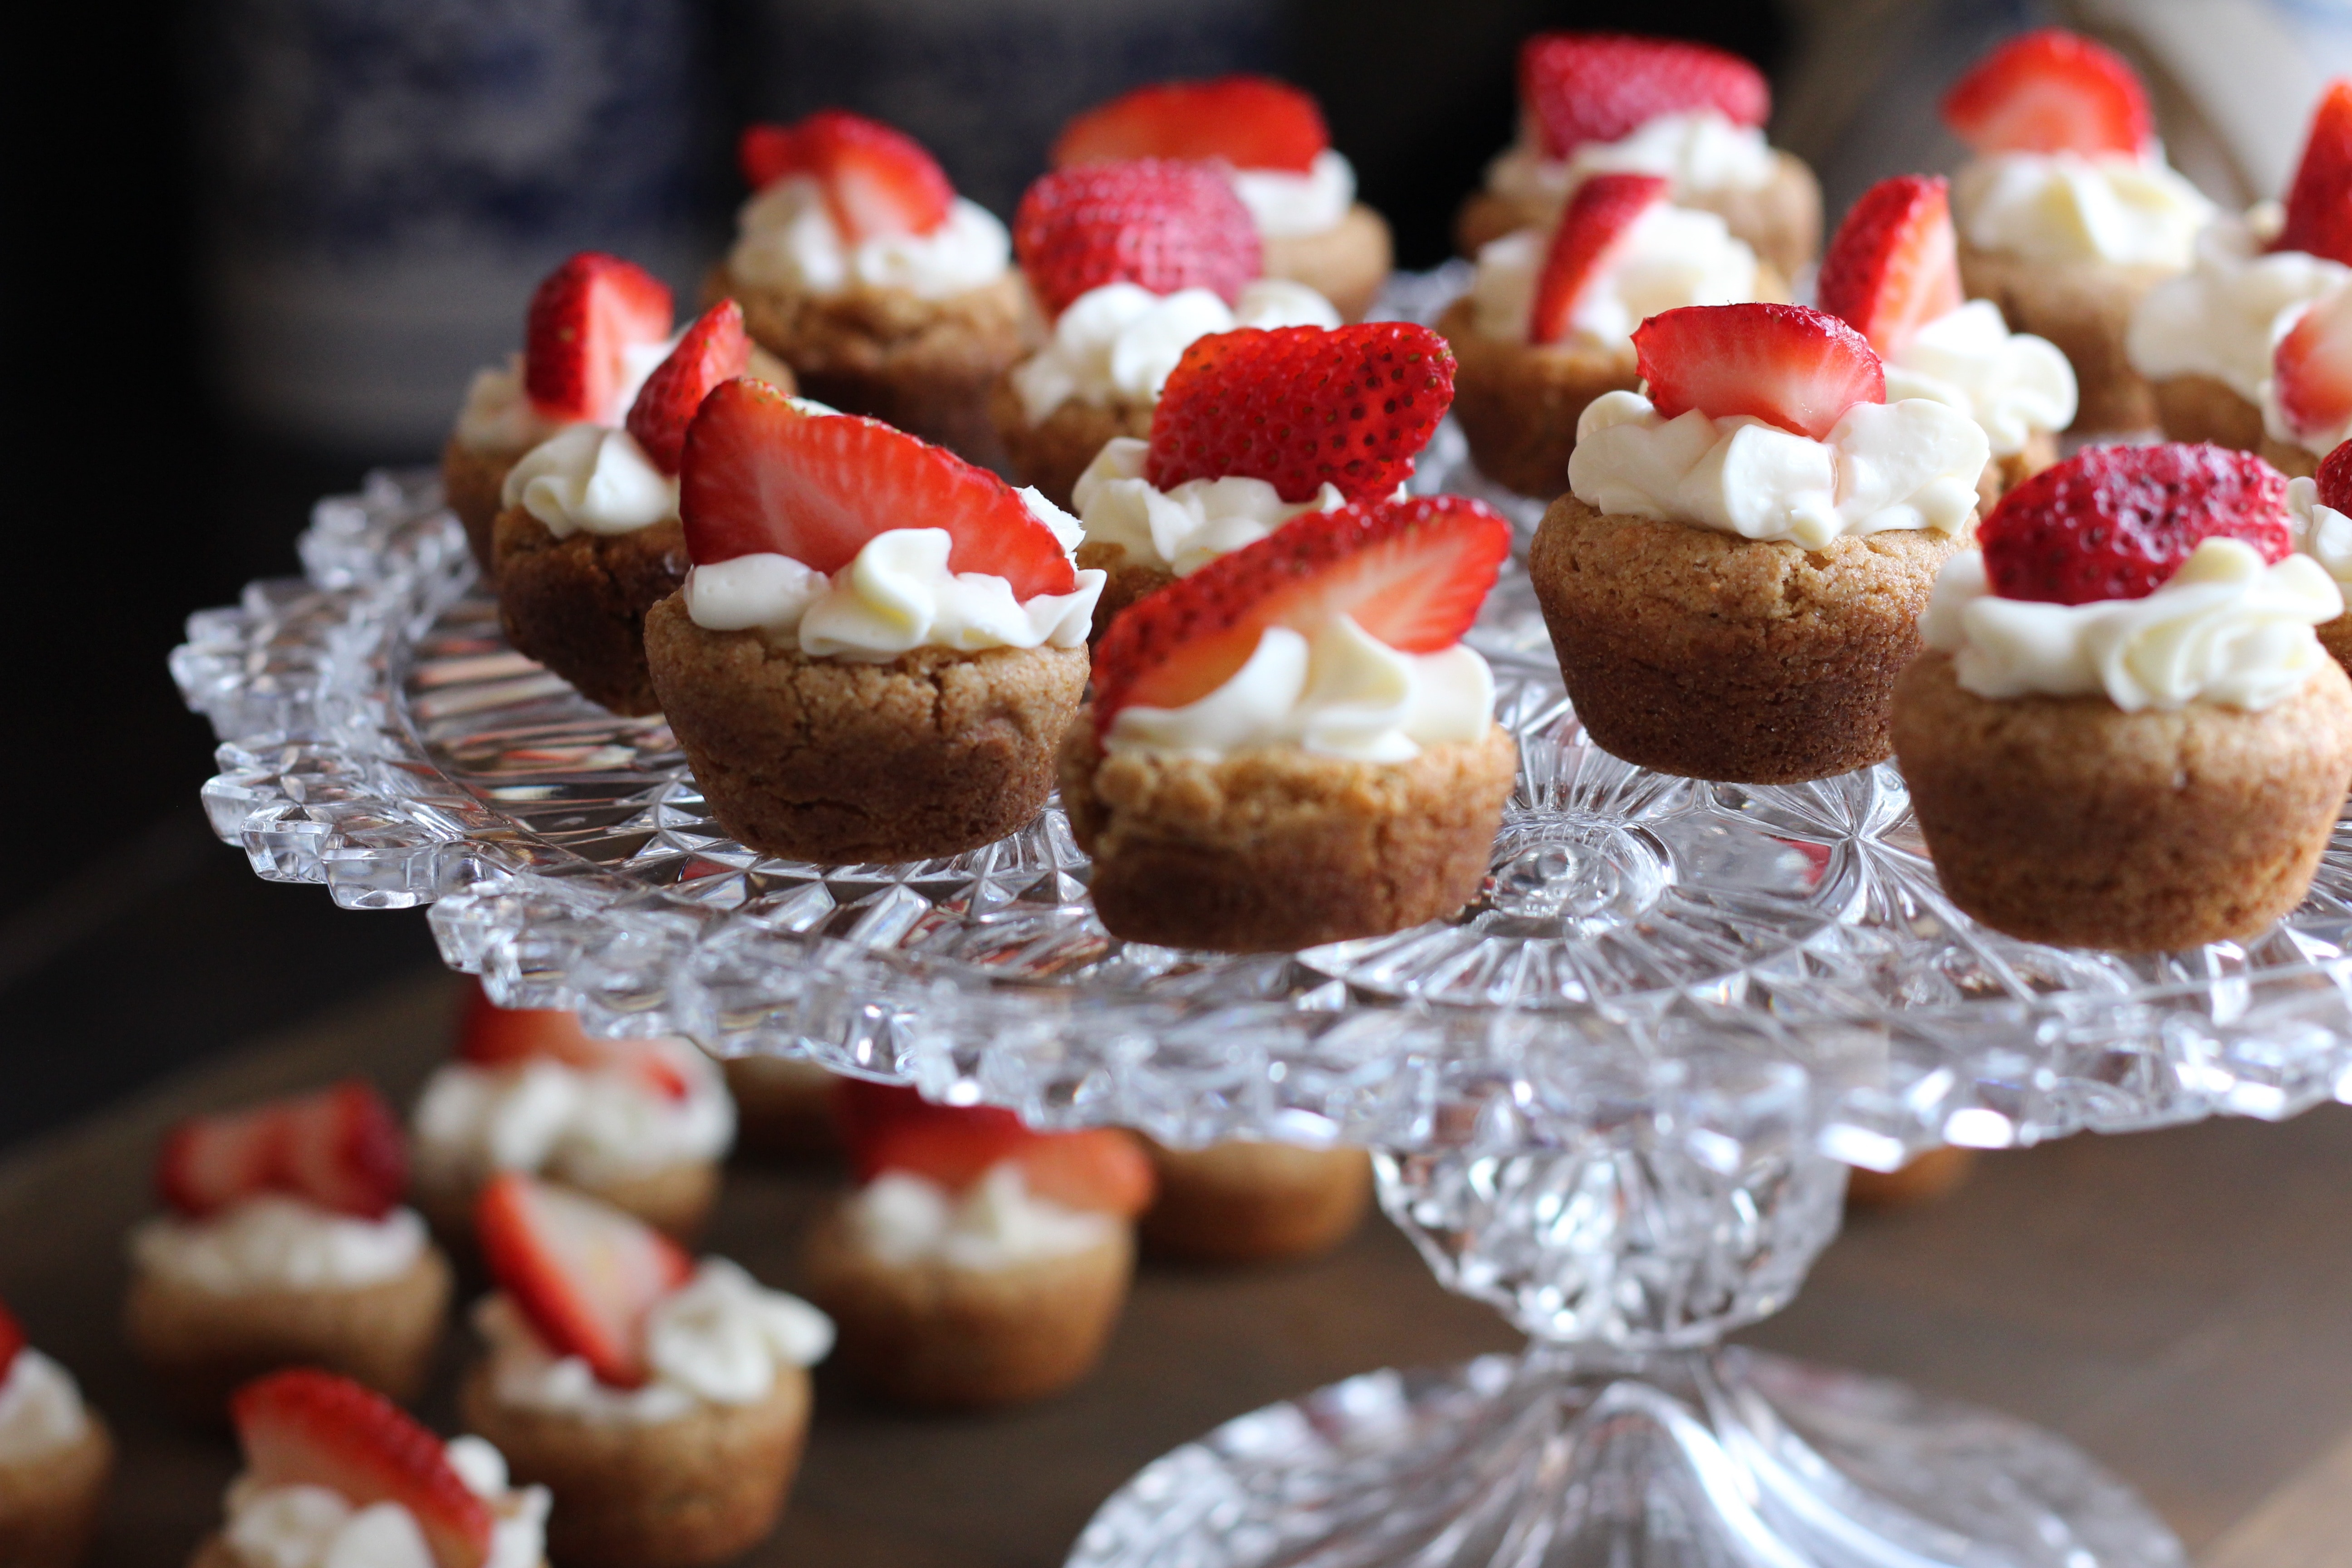 mini cupcakes topped with white cream and sliced strawberries